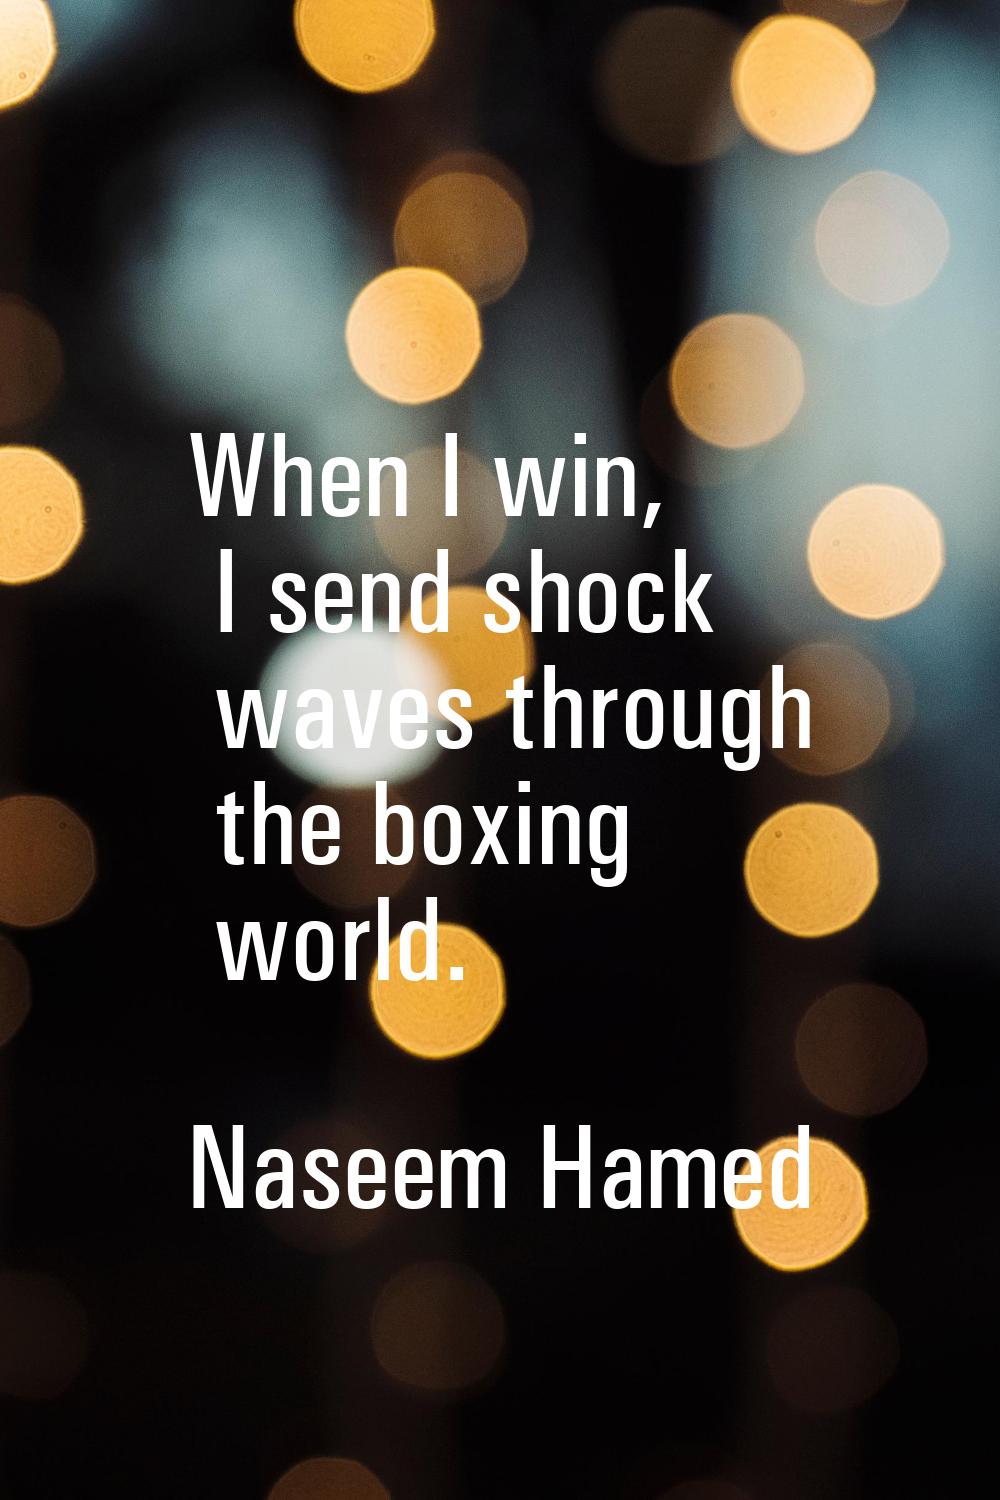 When I win, I send shock waves through the boxing world.